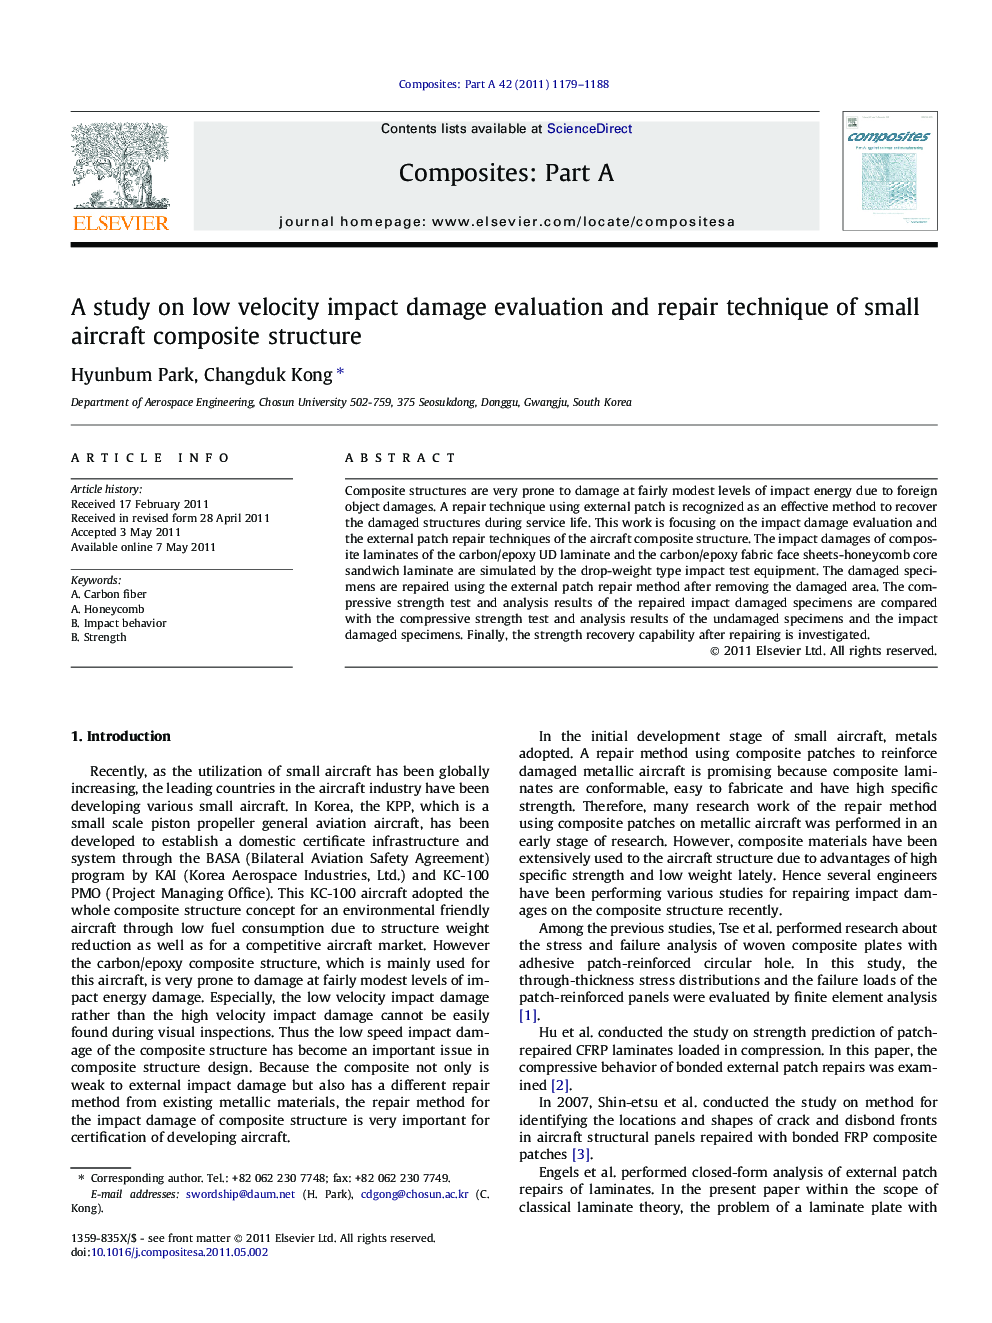 A study on low velocity impact damage evaluation and repair technique of small aircraft composite structure